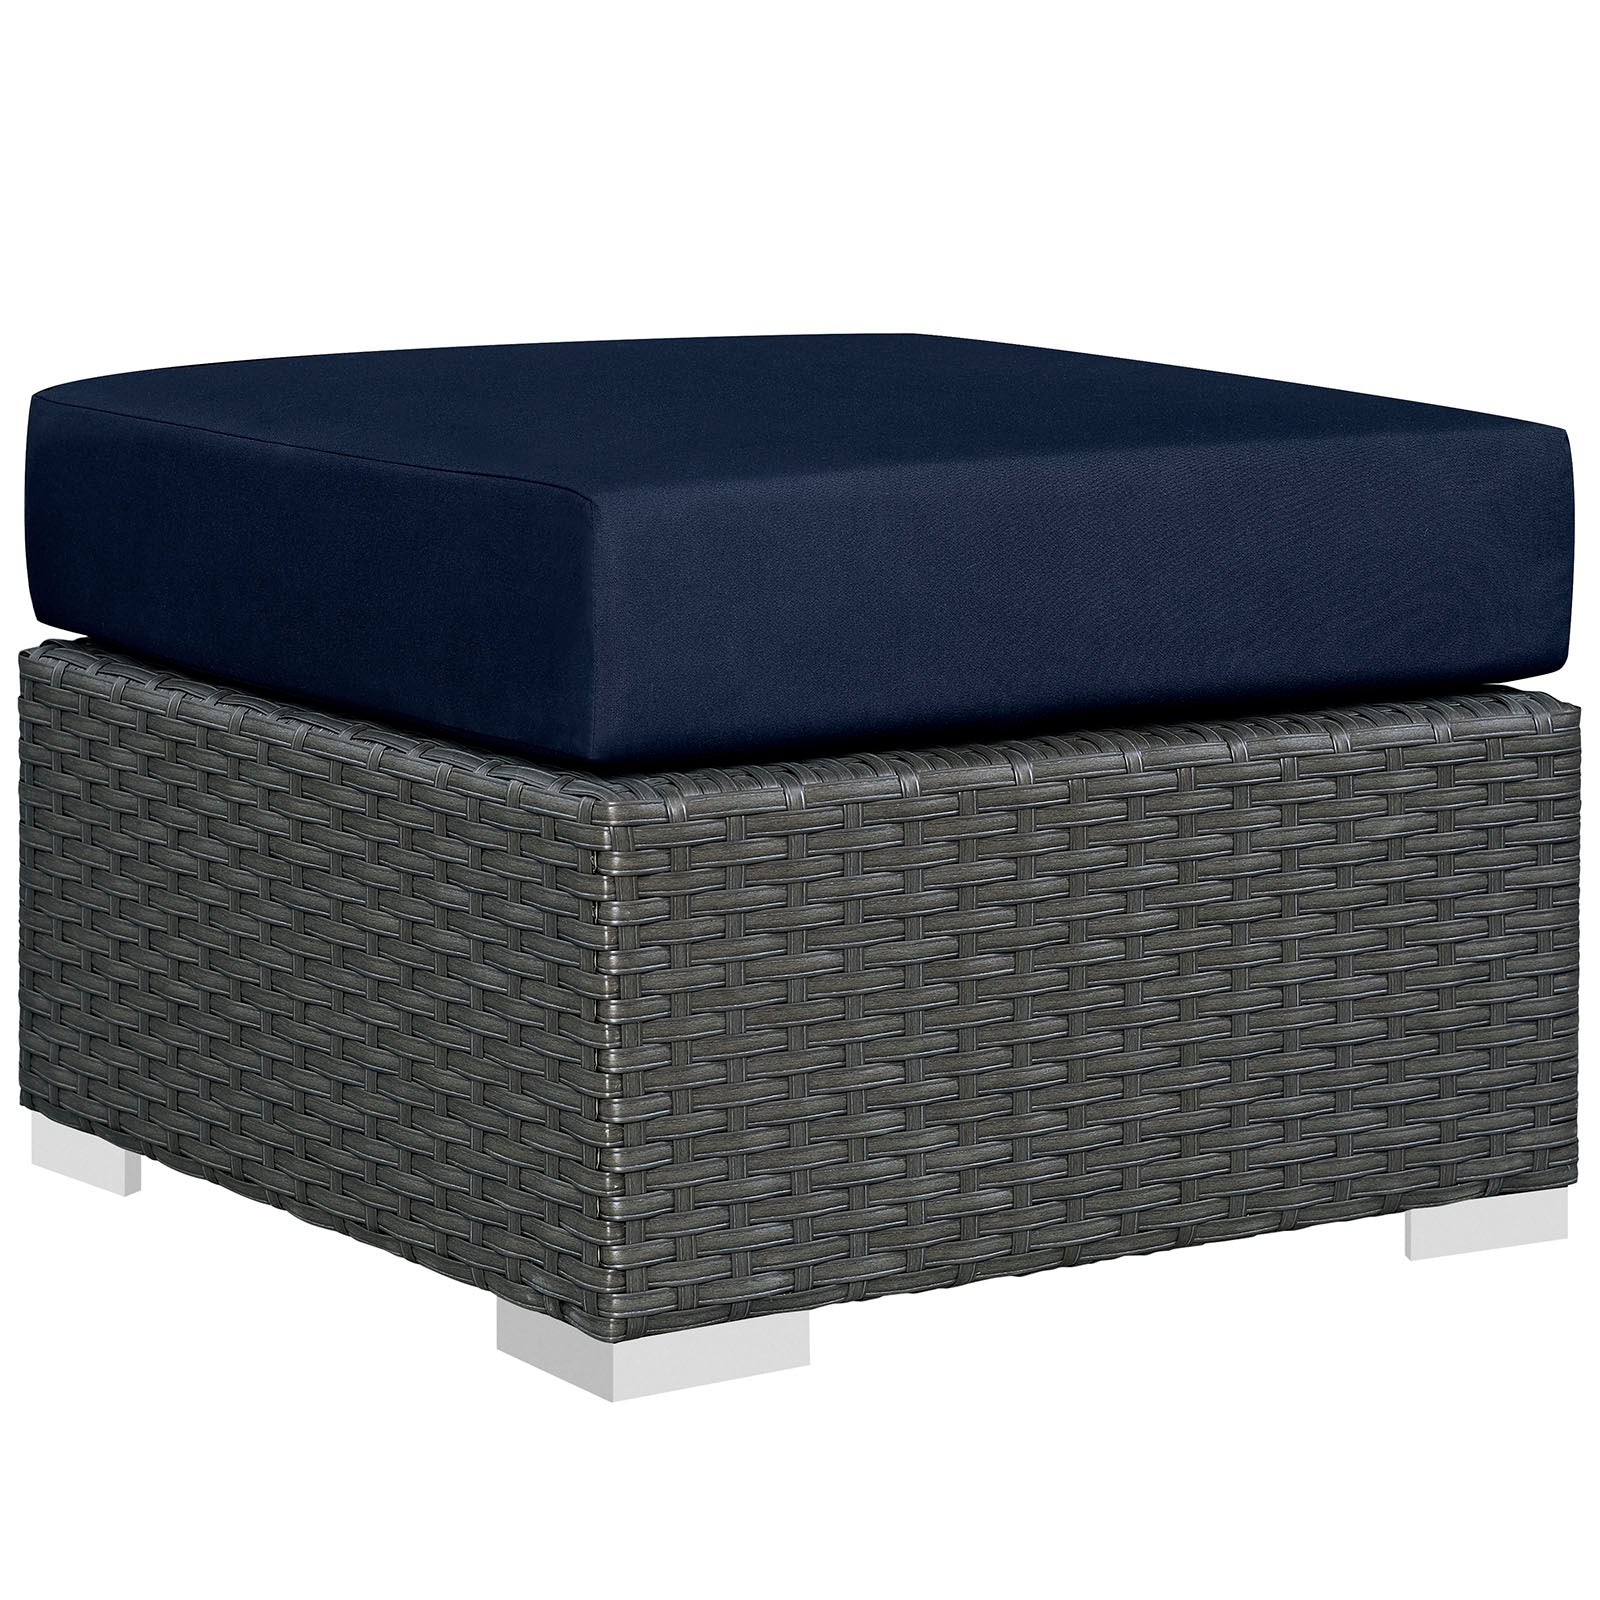 Sojourn 5 Piece Outdoor Patio Sectional Set Navy